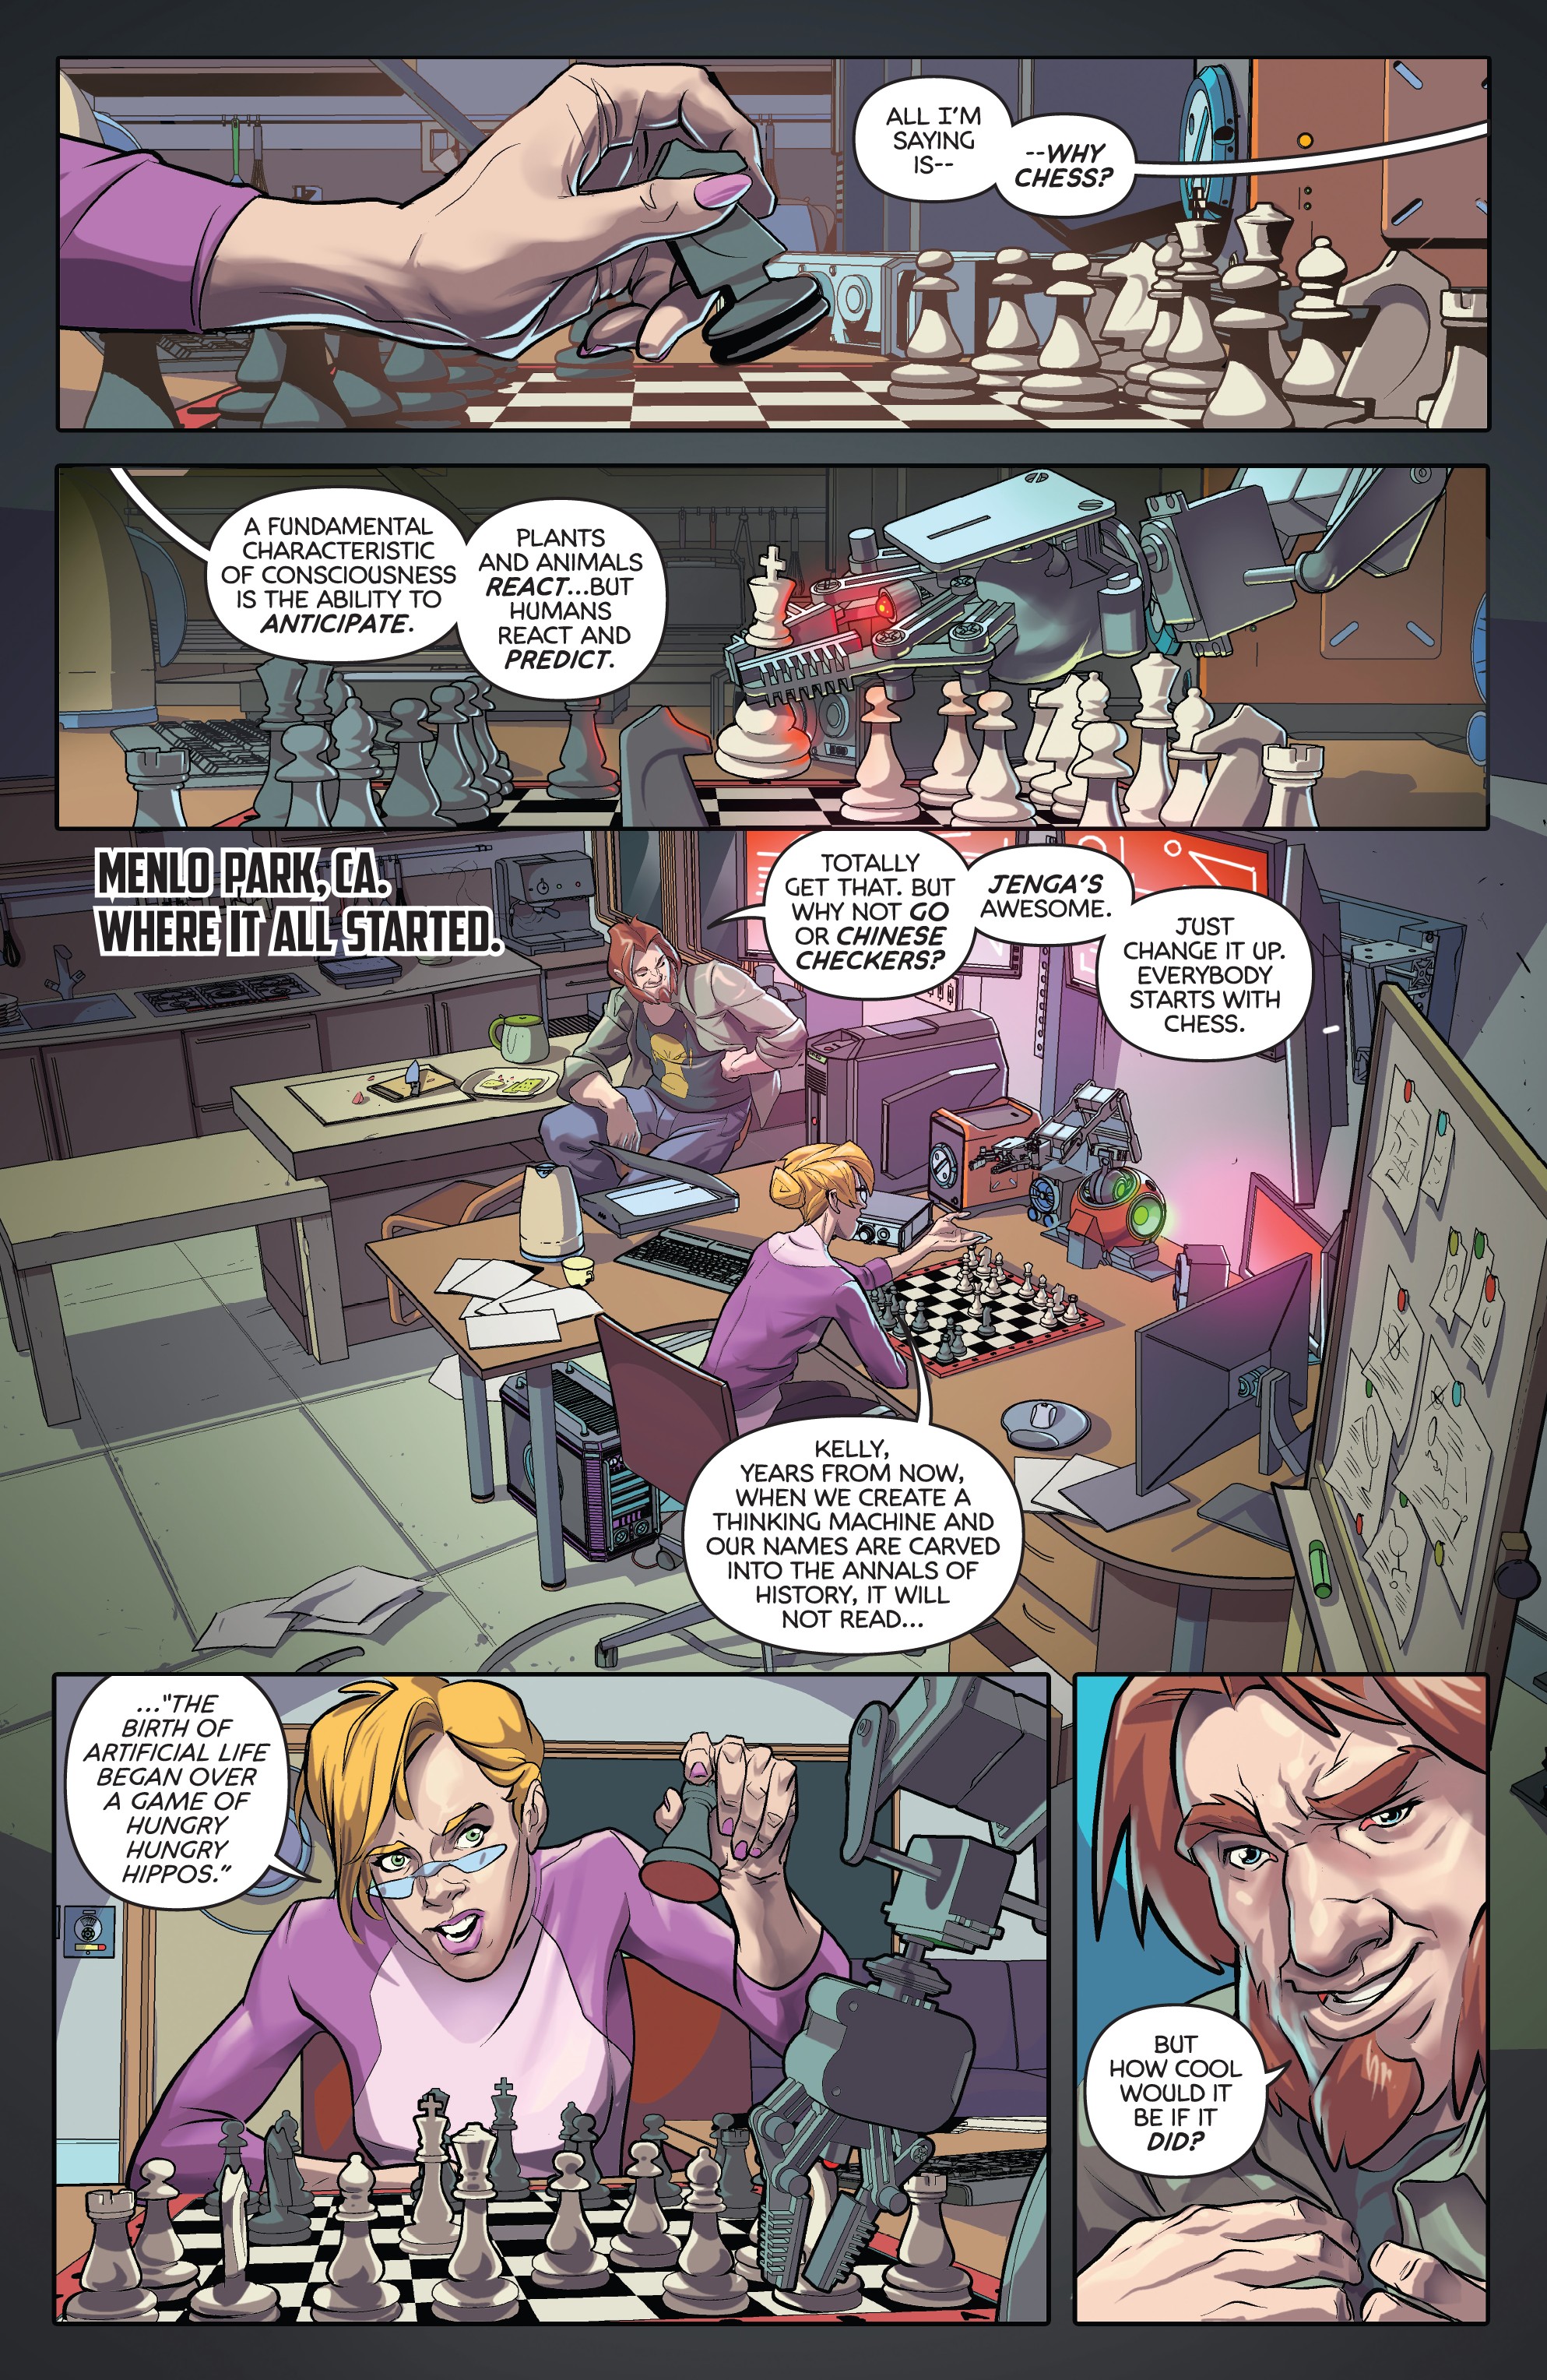 Volition (2018-): Chapter 3 - Page 3